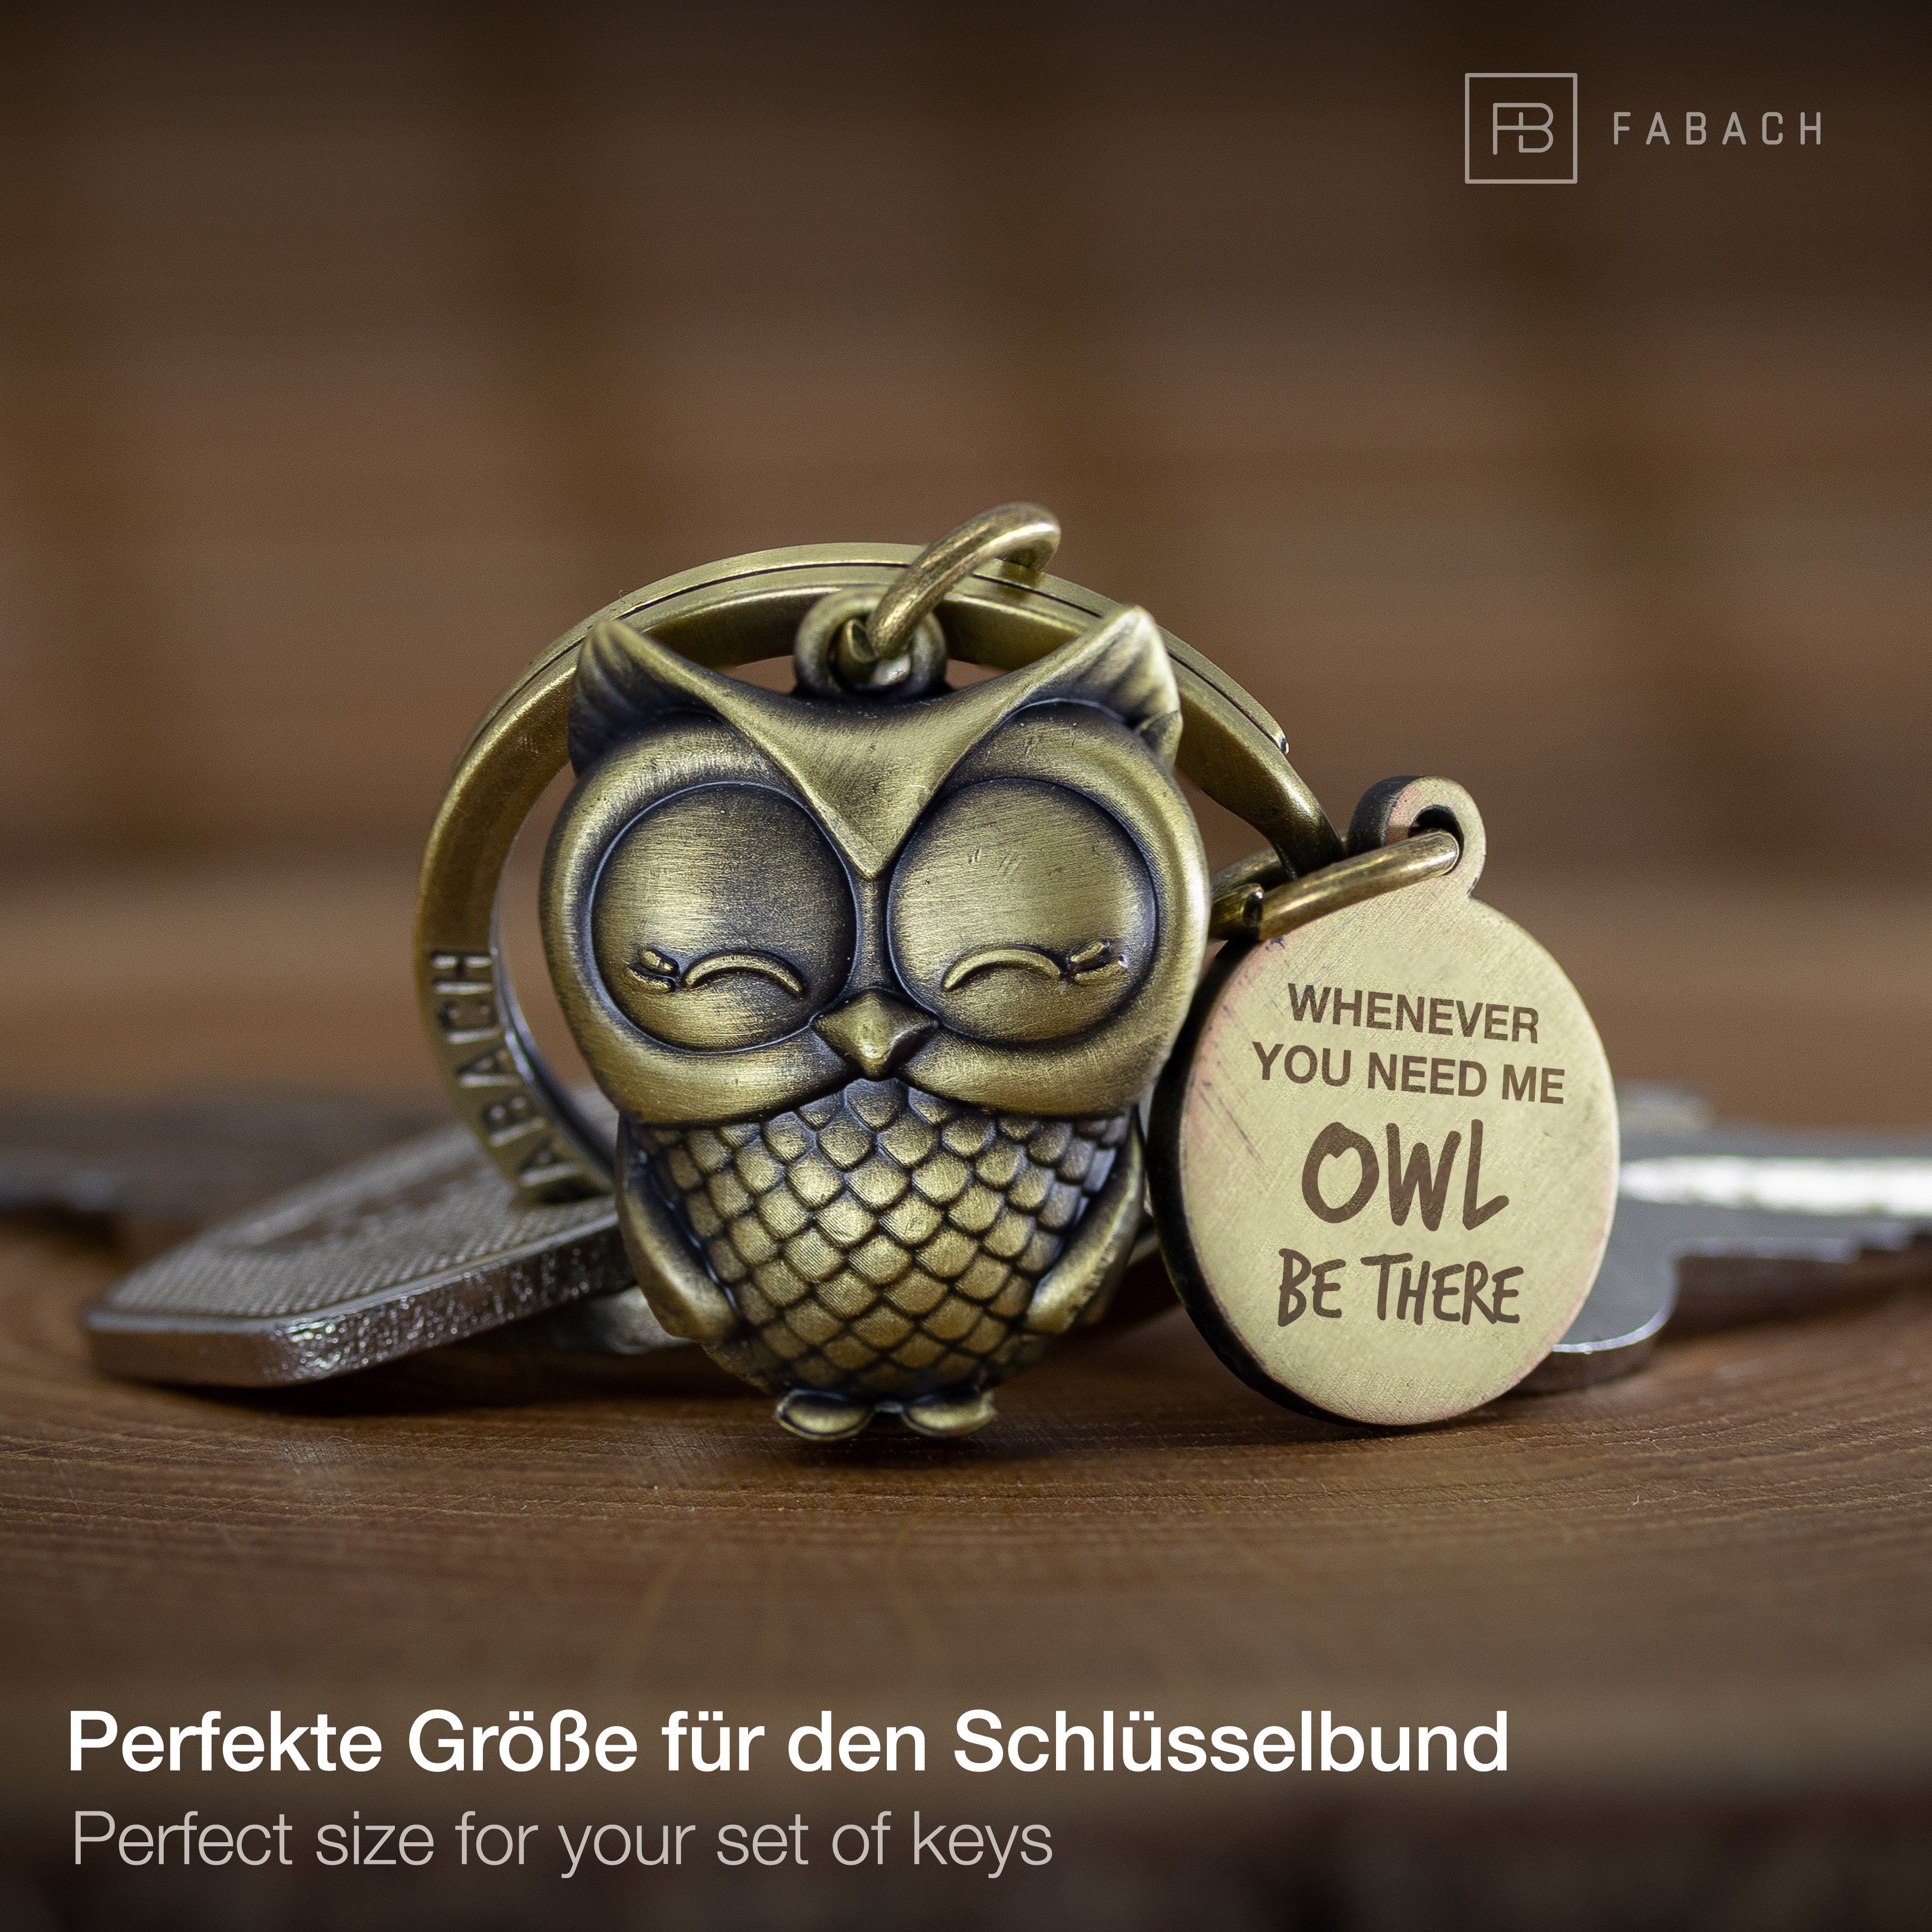 Bronze Owly - there Glücksbringer Antique me owl you Eule be FABACH Whenever Schlüsselanhänger need Gravur